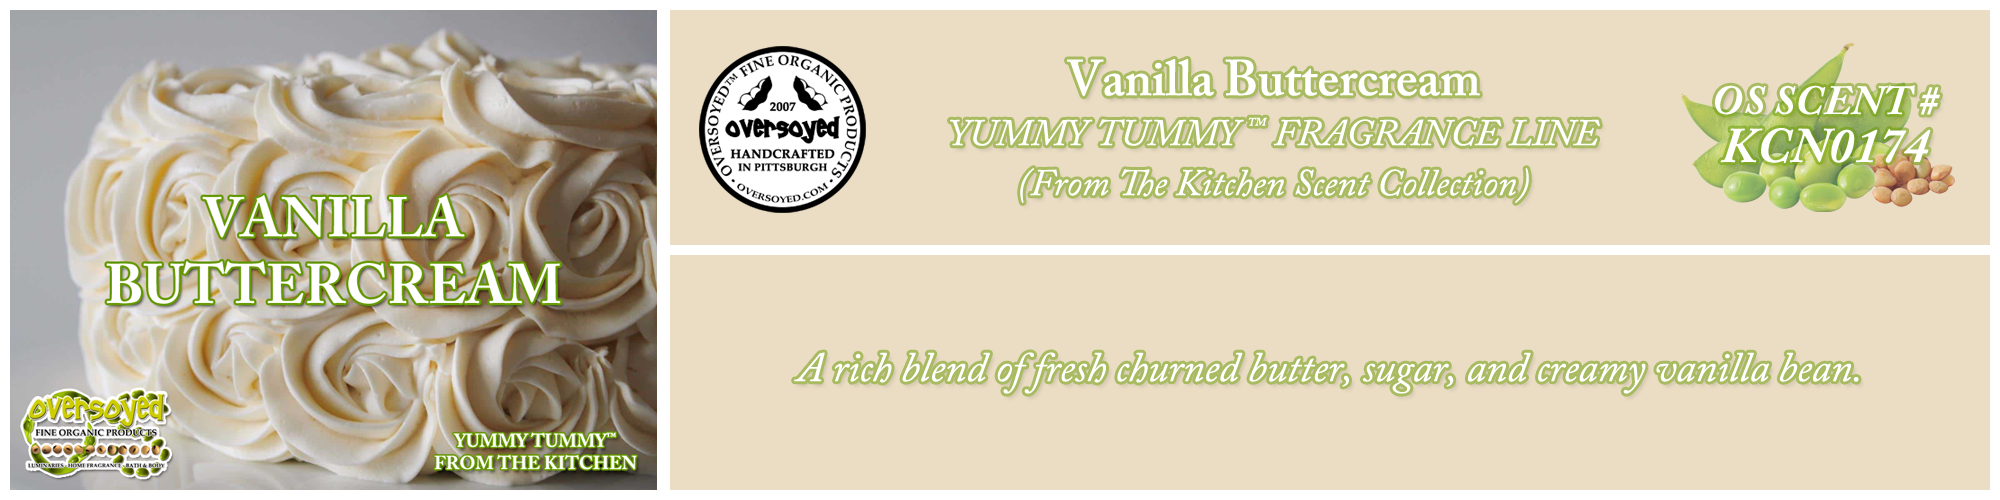 Vanilla Buttercream Handcrafted Products Collection